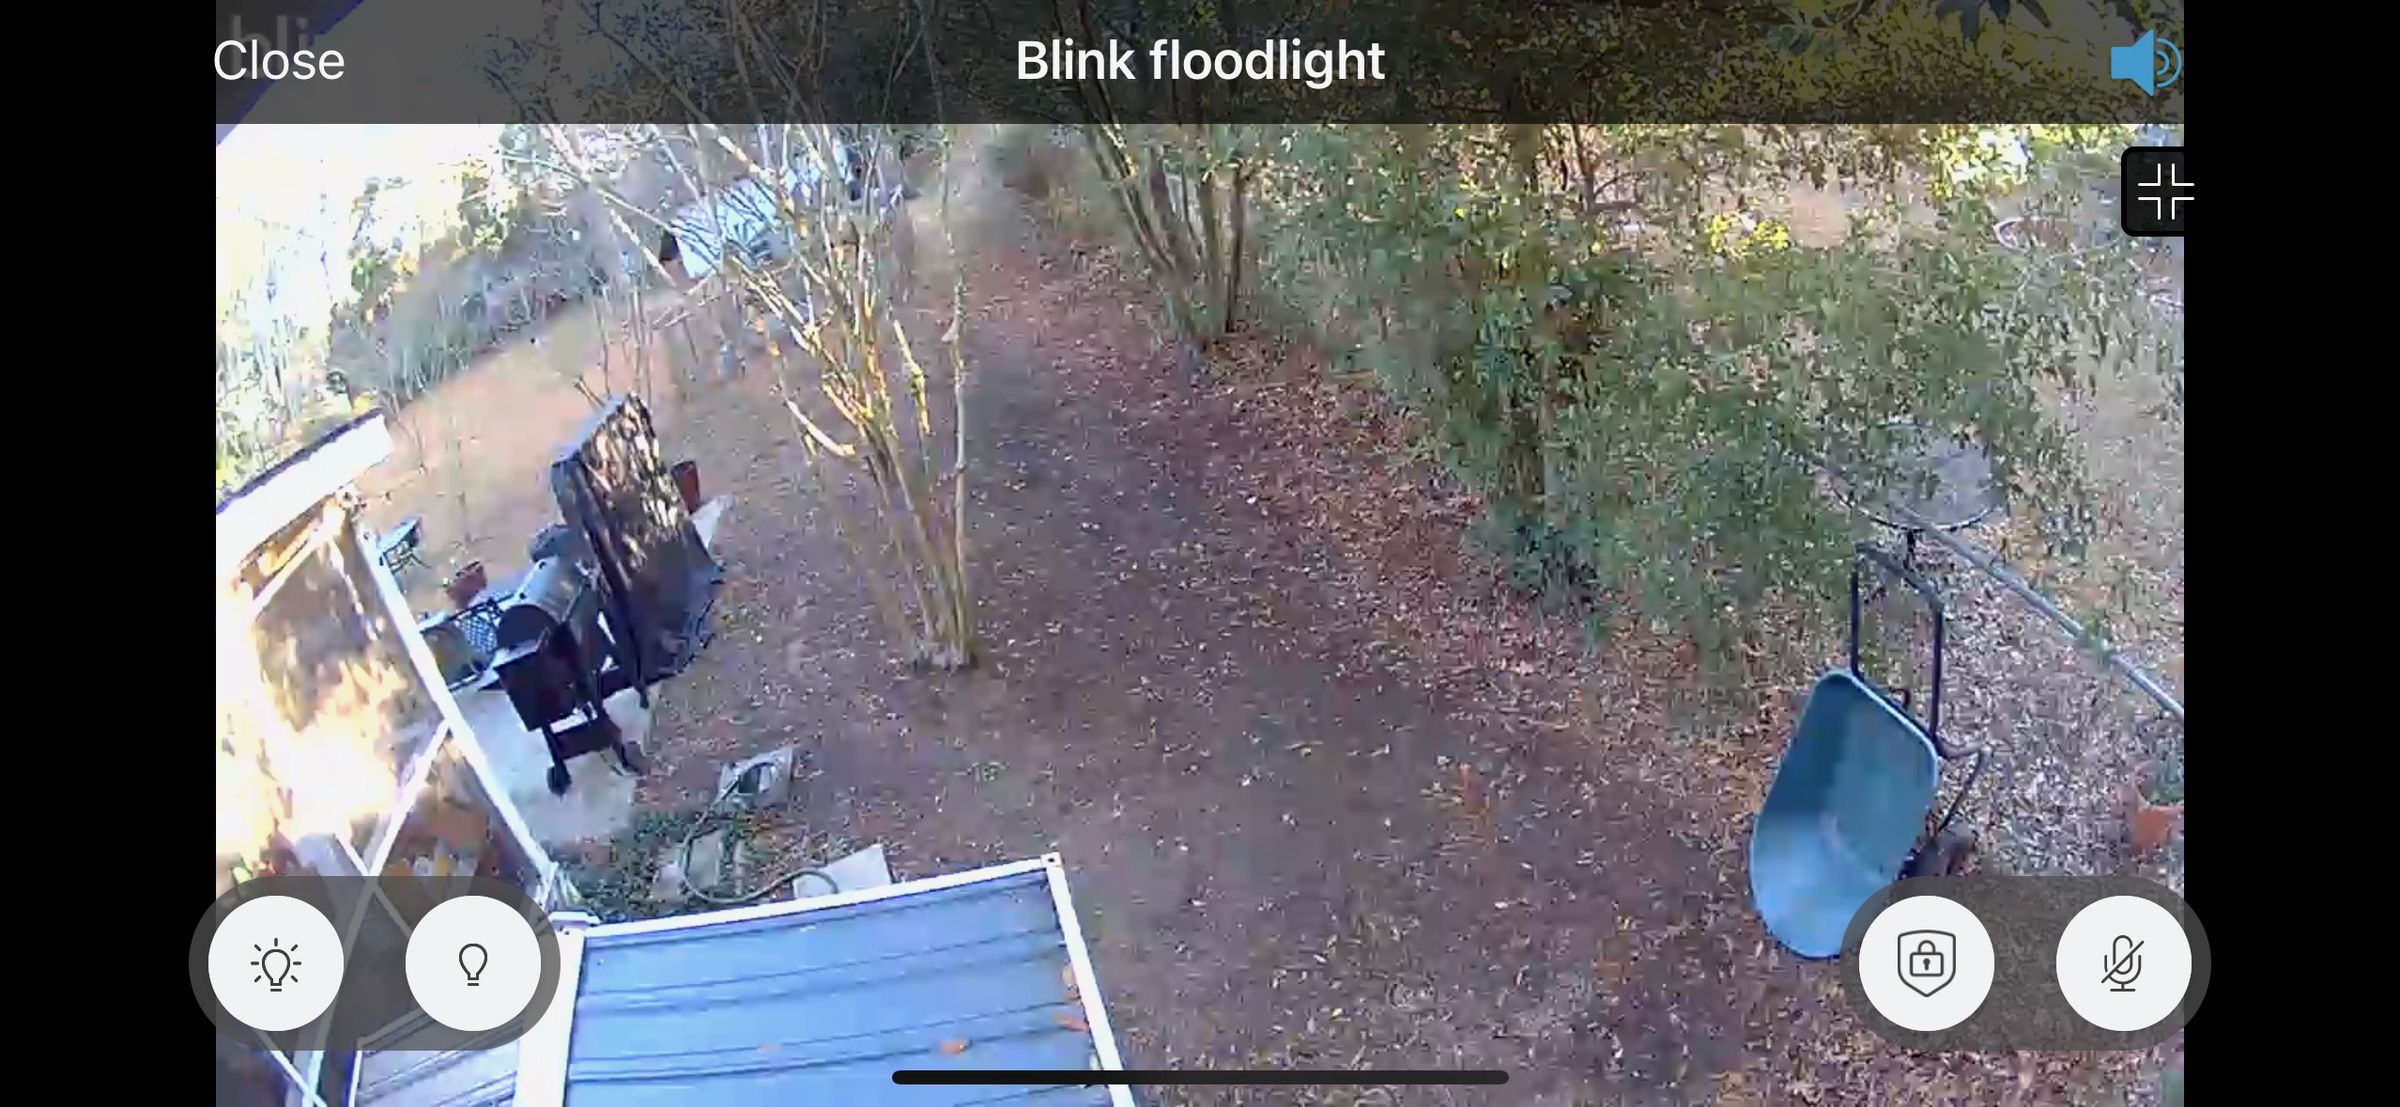 The Blink loses quality in the distance and has a short range of motion detection, but it’s clear close up and shows faces well during the day and at night.